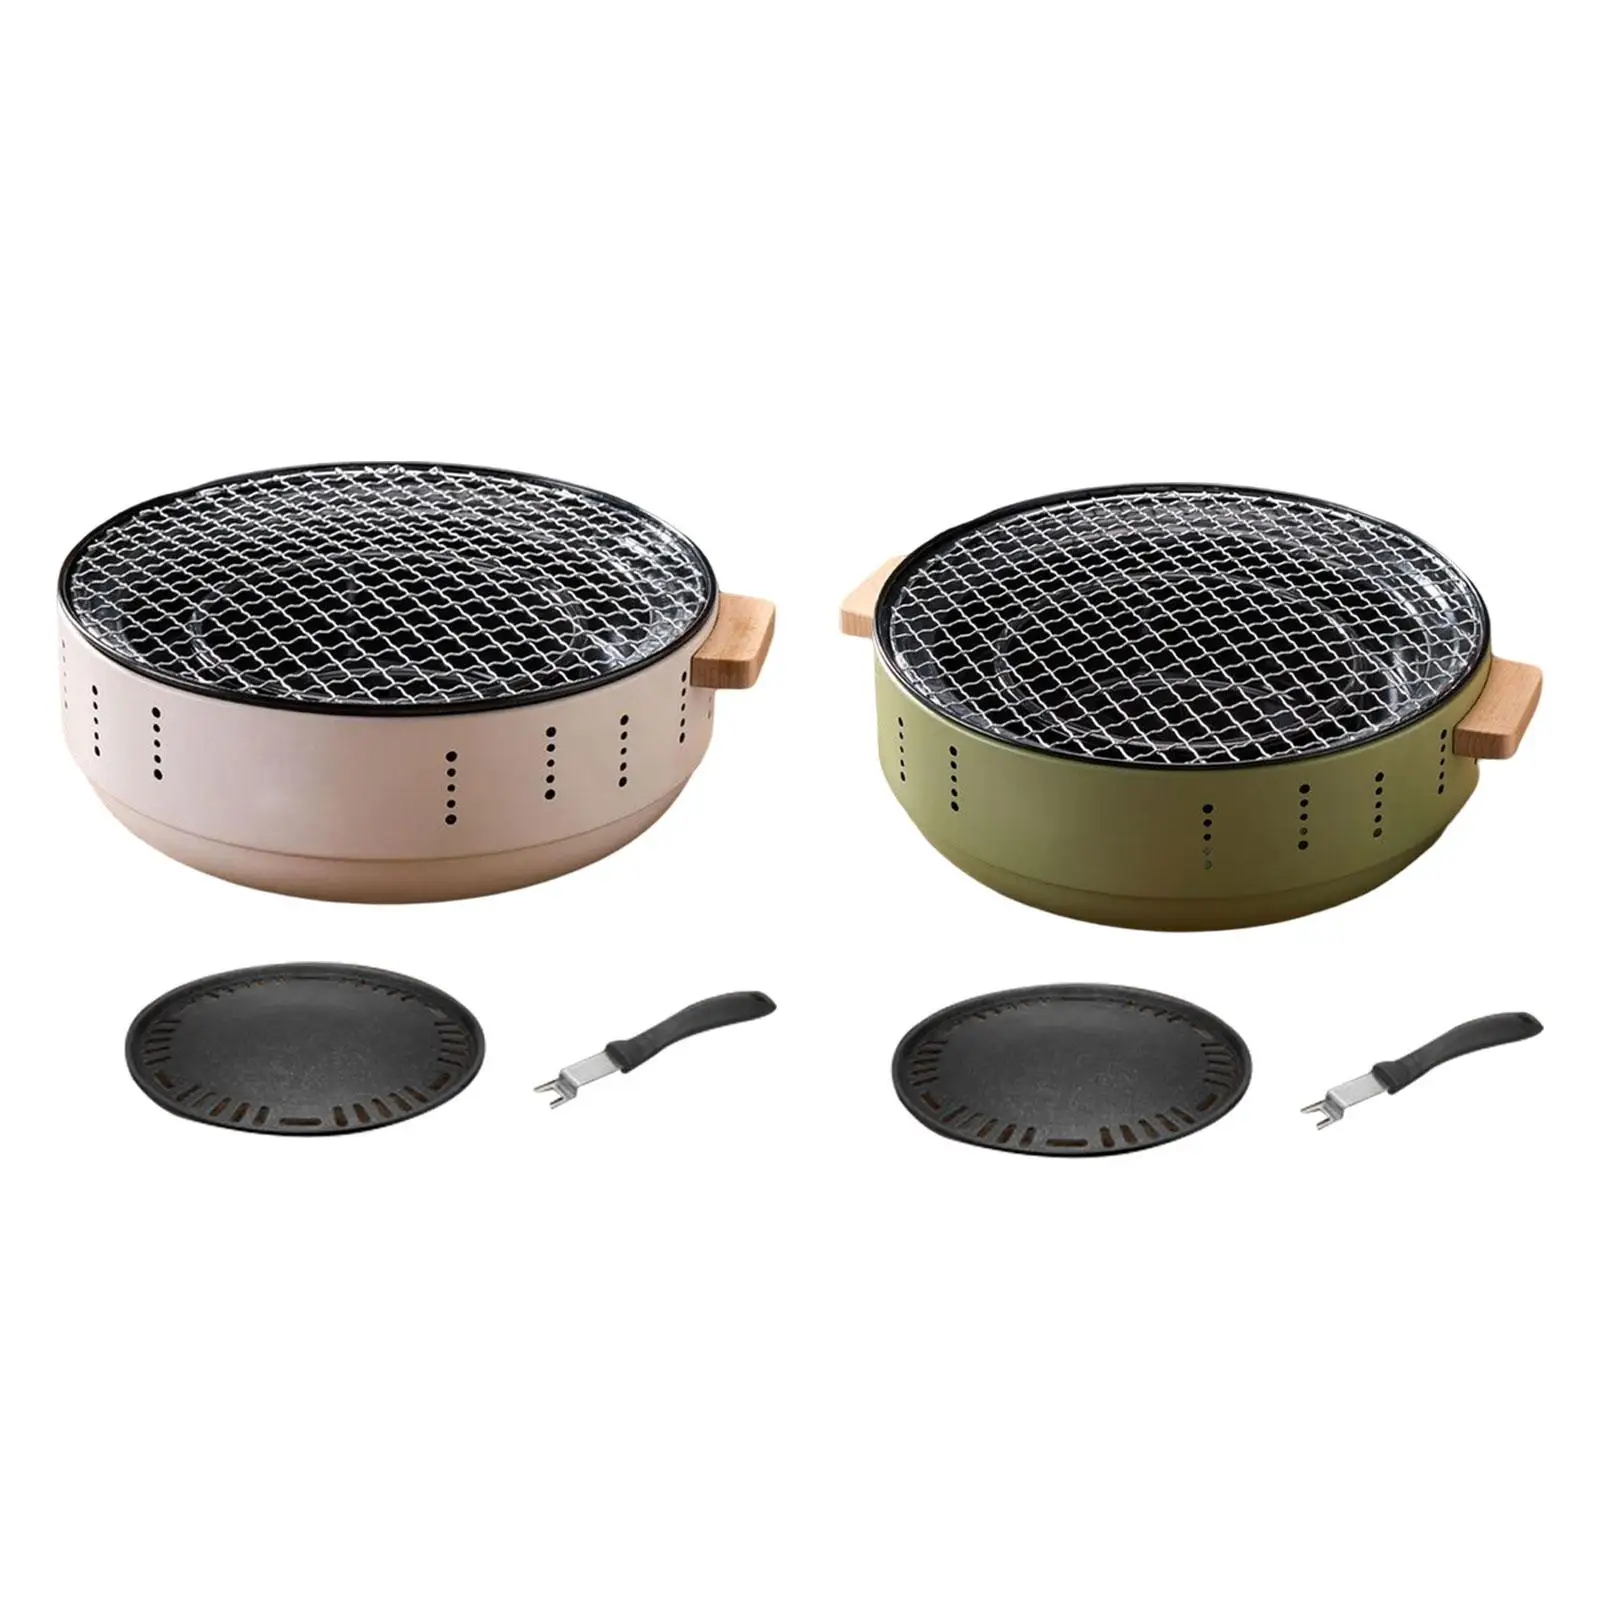 Small Barbecue Grill Multifunctional Camping Grill for Hiking Home Garden Cooking